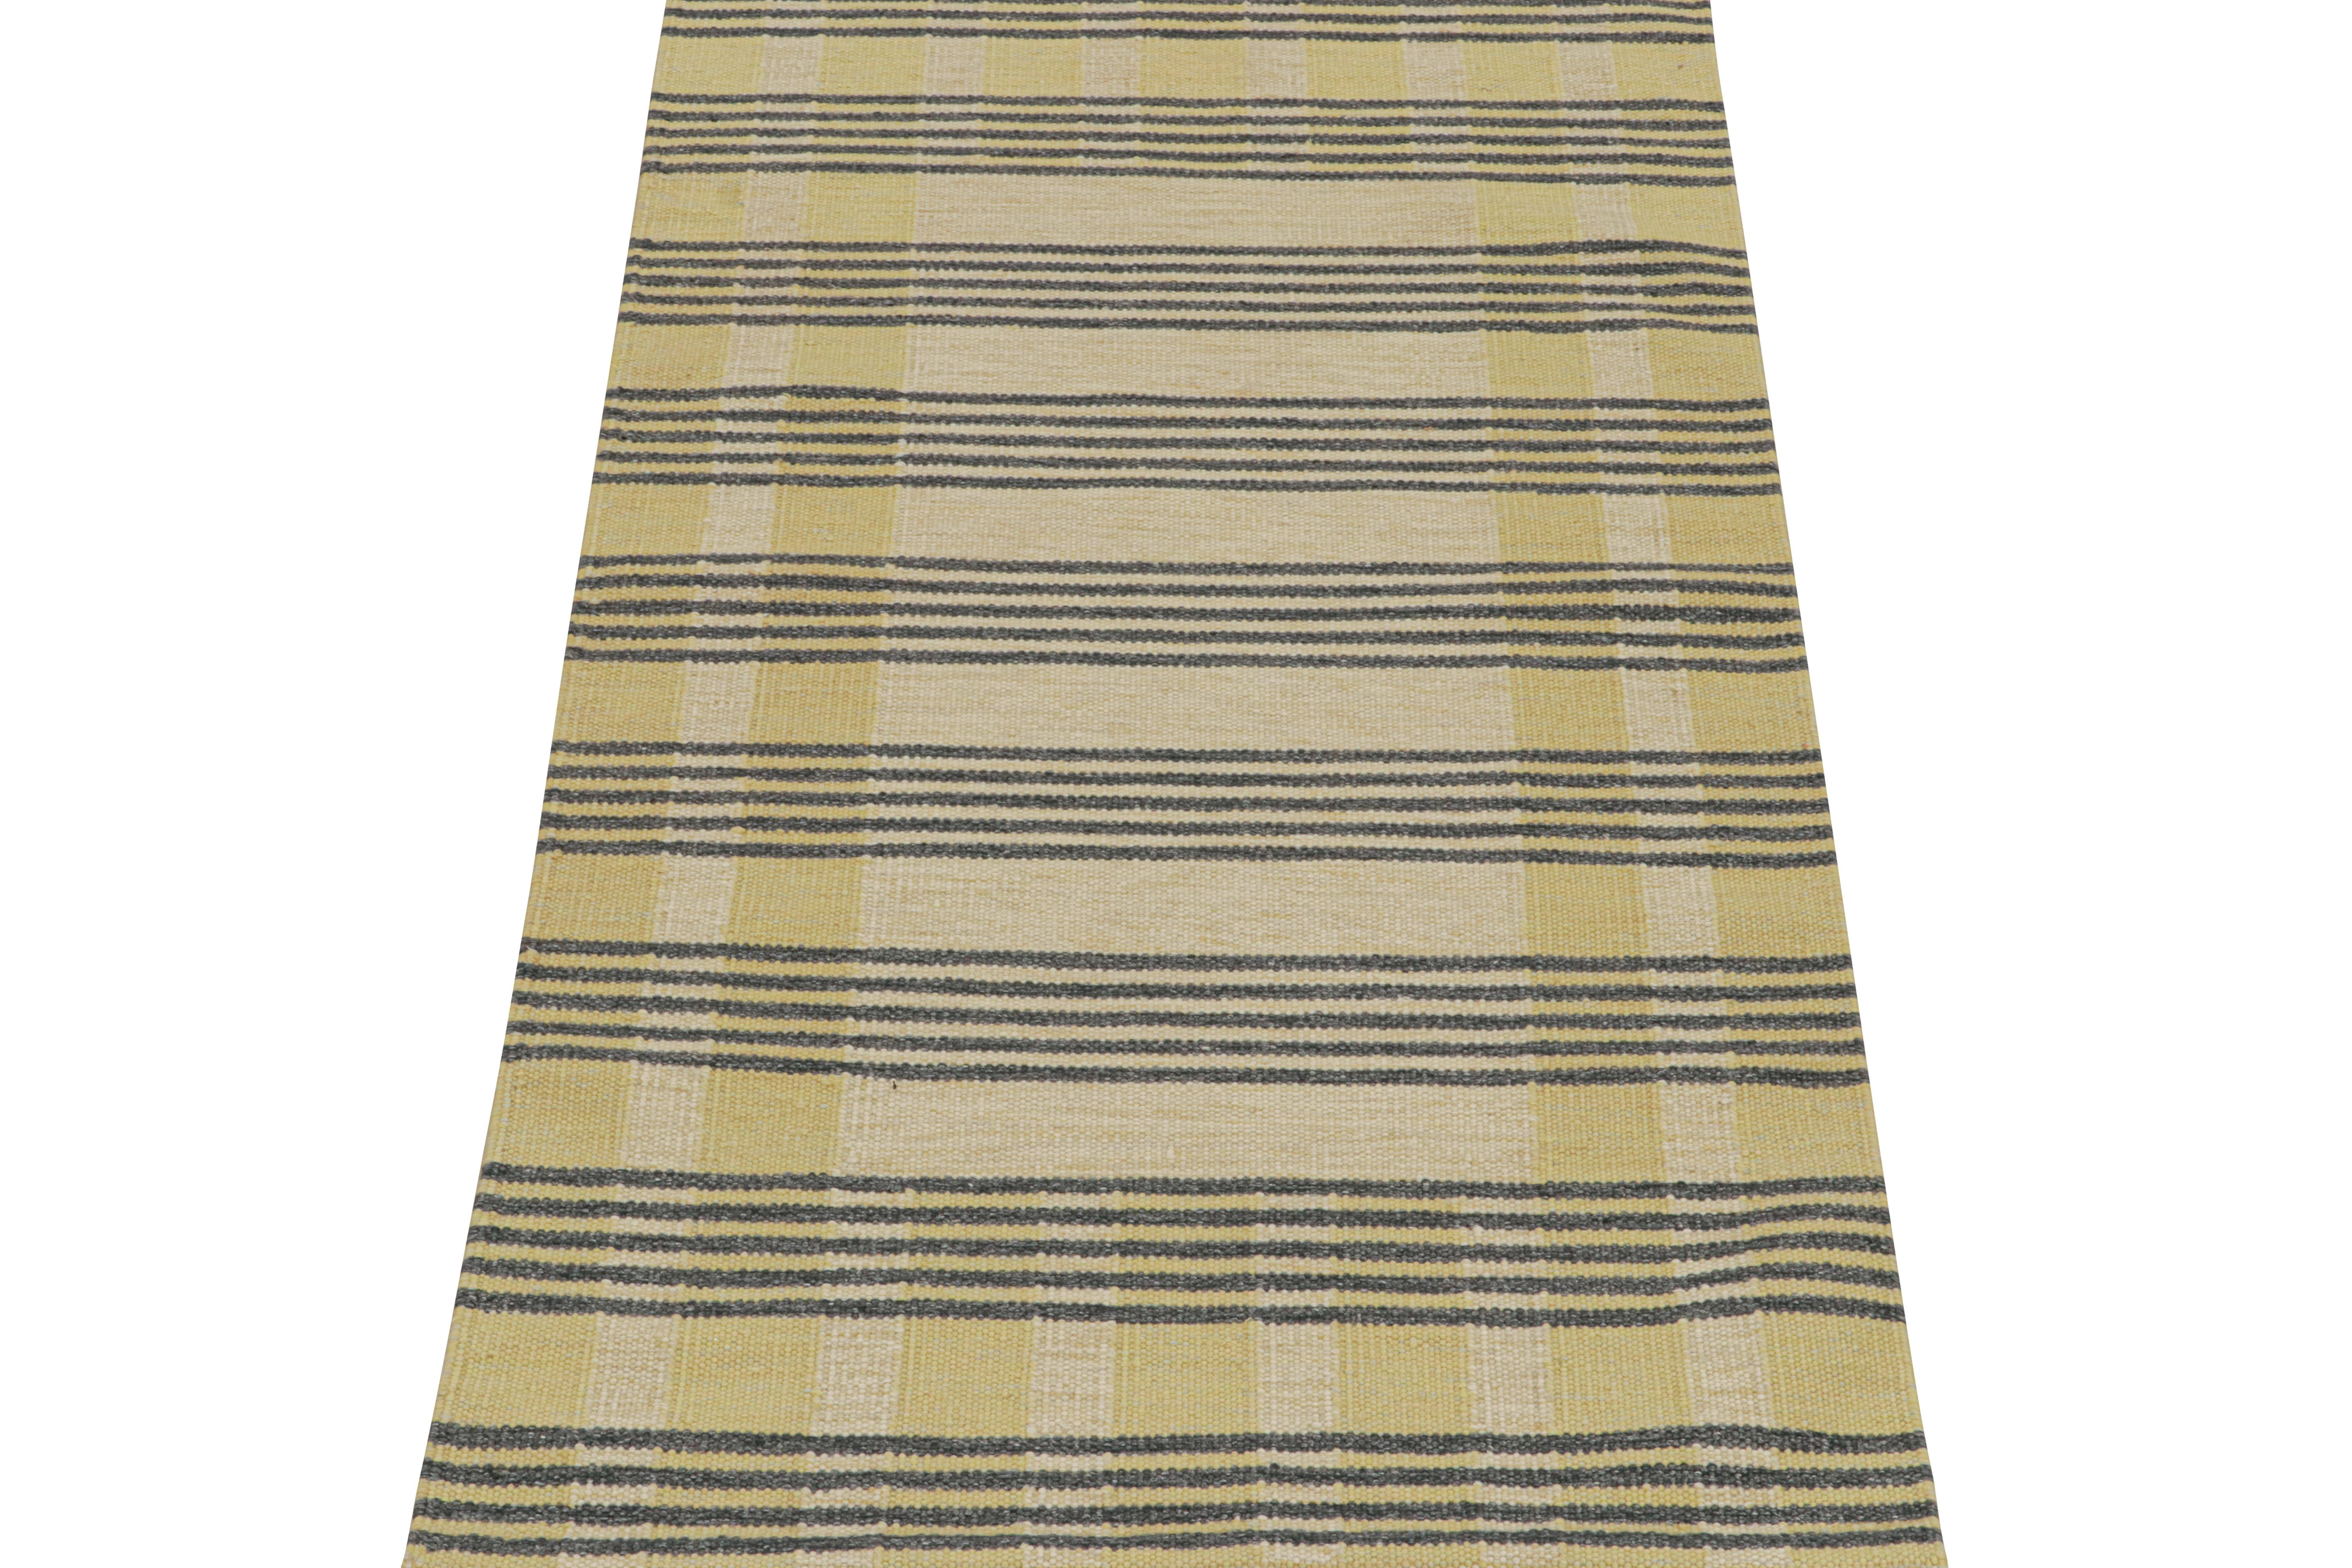 This 4x8 flat weave is a new addition to the Scandinavian Kilim collection by Rug & Kilim. Handwoven in wool and natural yarns, its design reflects a contemporary take on mid-century Rollakans and Swedish Deco style.

On the Design:

This new